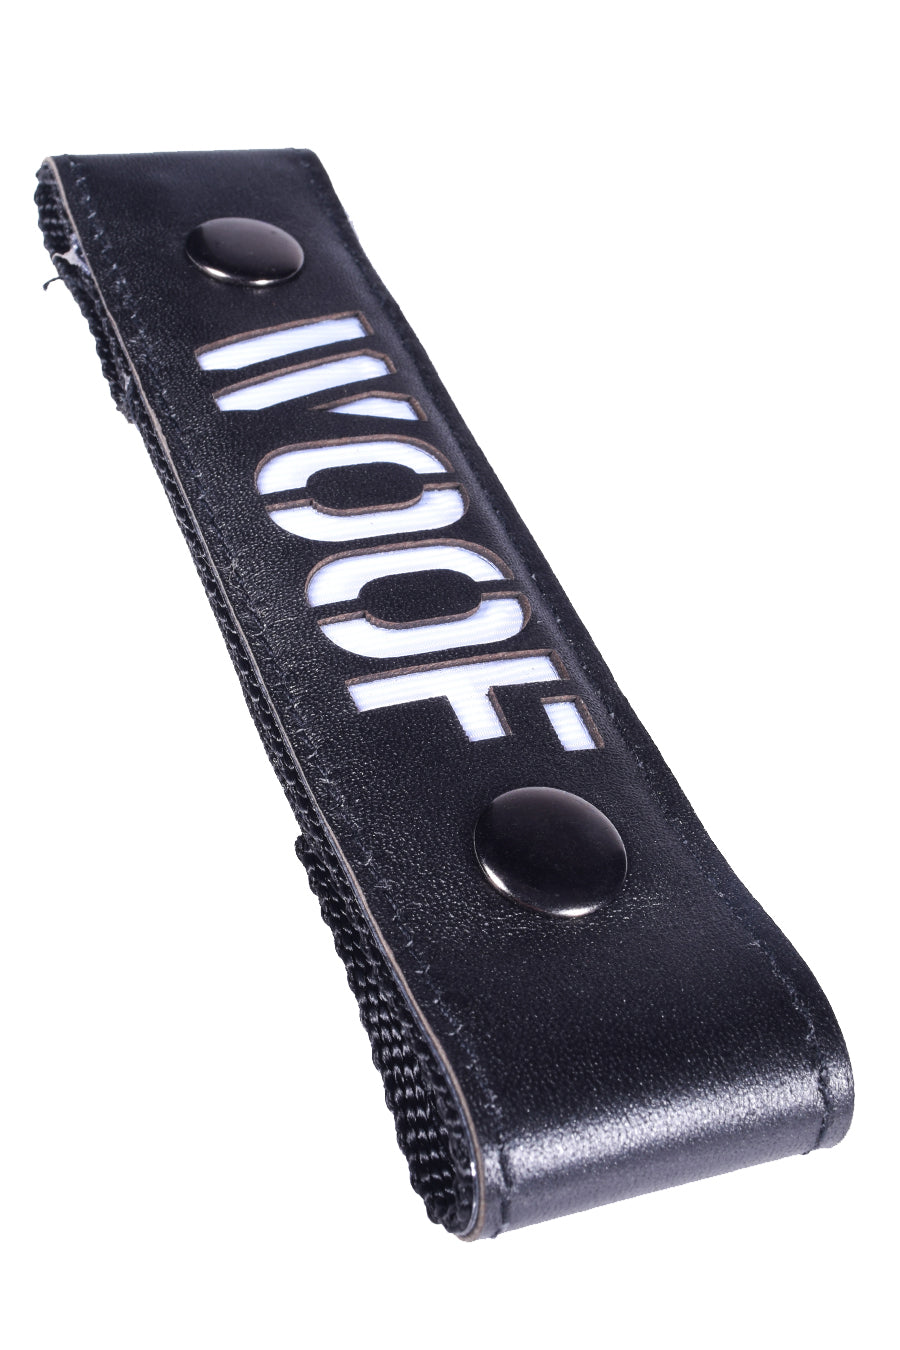 GLOW CENTER STRAP- WOOF - DealByEthan.gay